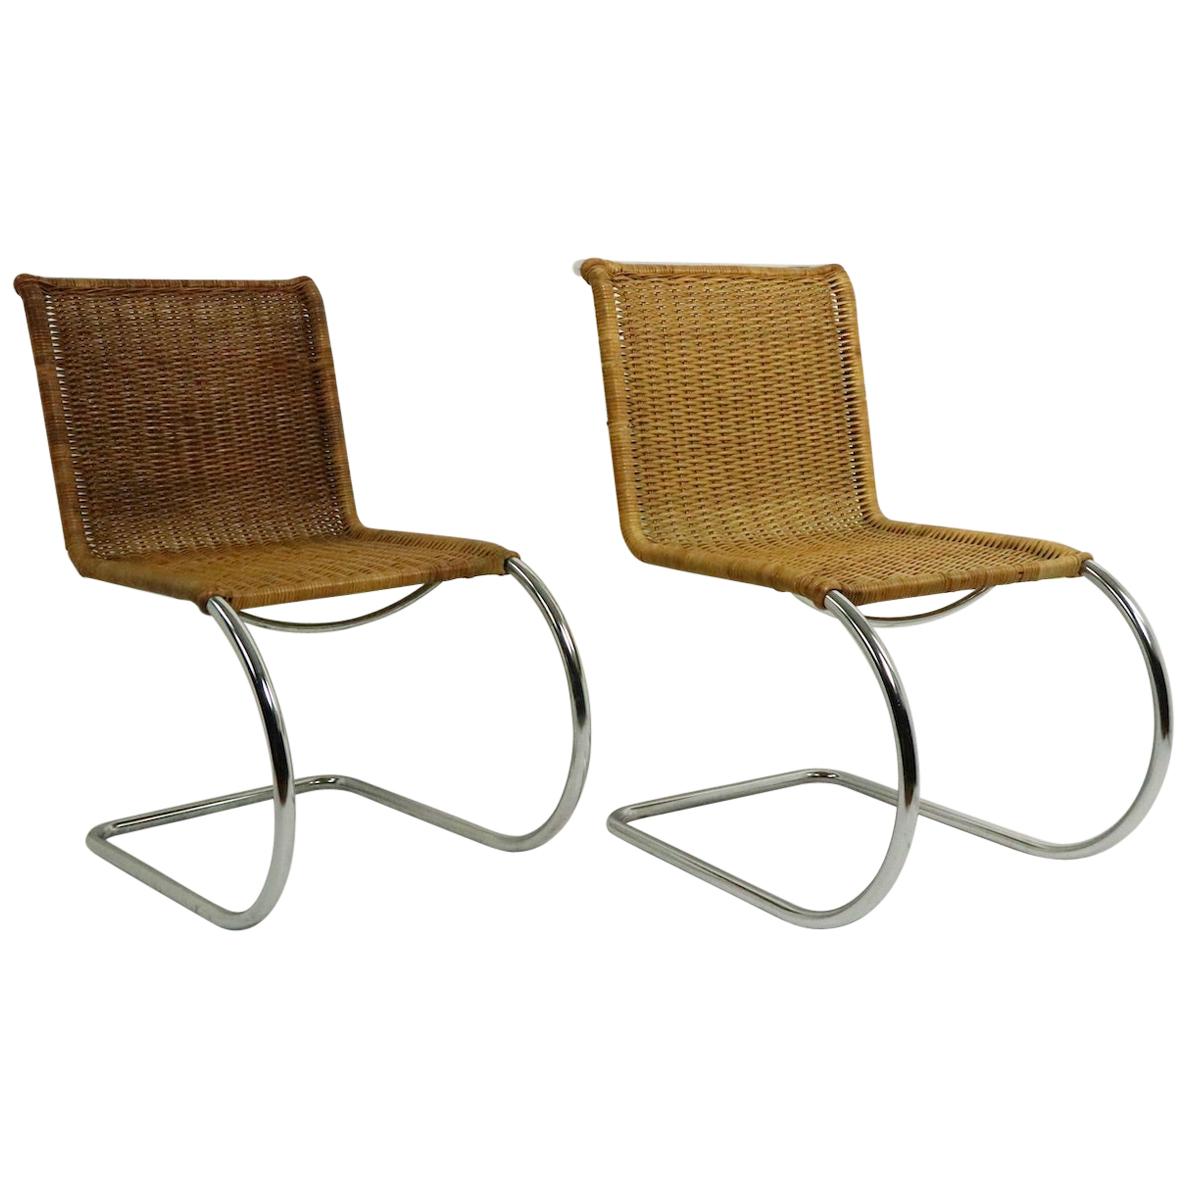 Pr. Mies Mr 10 Dining Chairs Woven Wicker on Chrome Frames